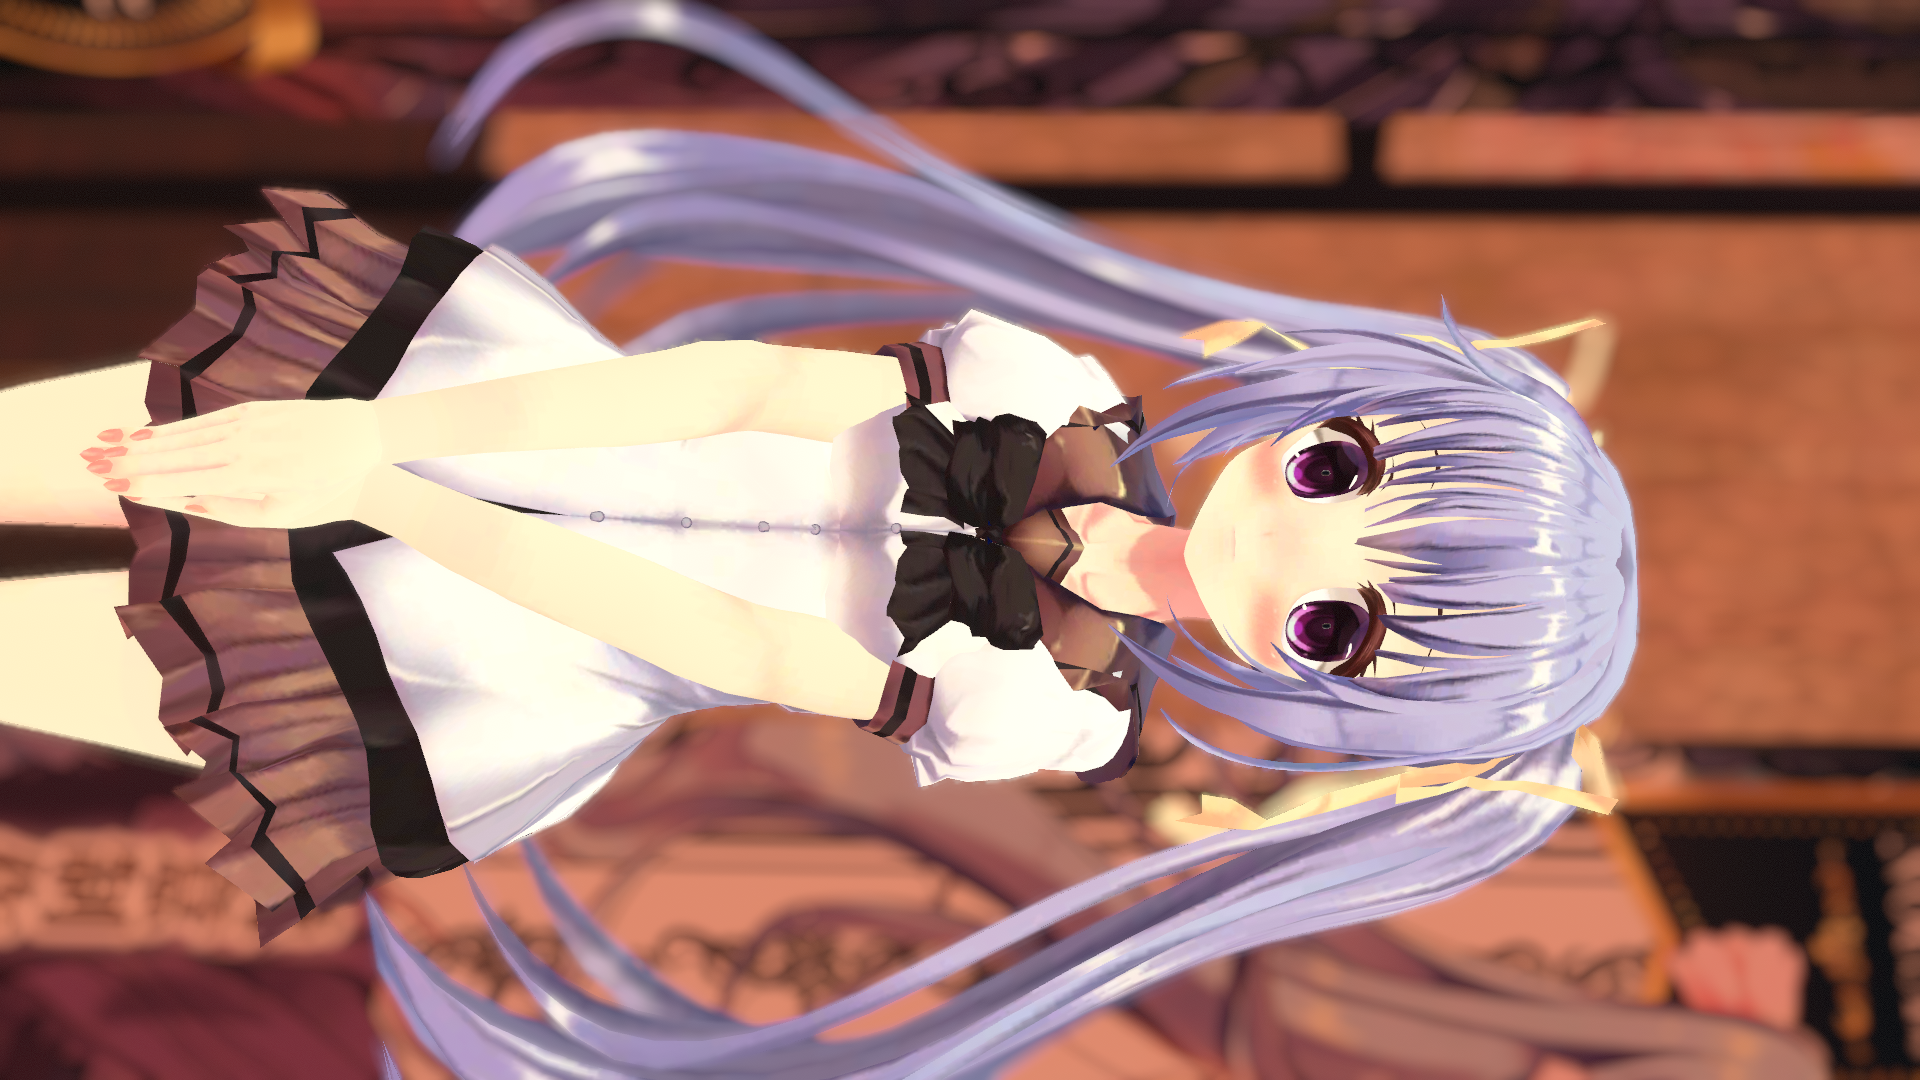 VRChat_1920x1080_2021-12-05_05-19-27.711.png